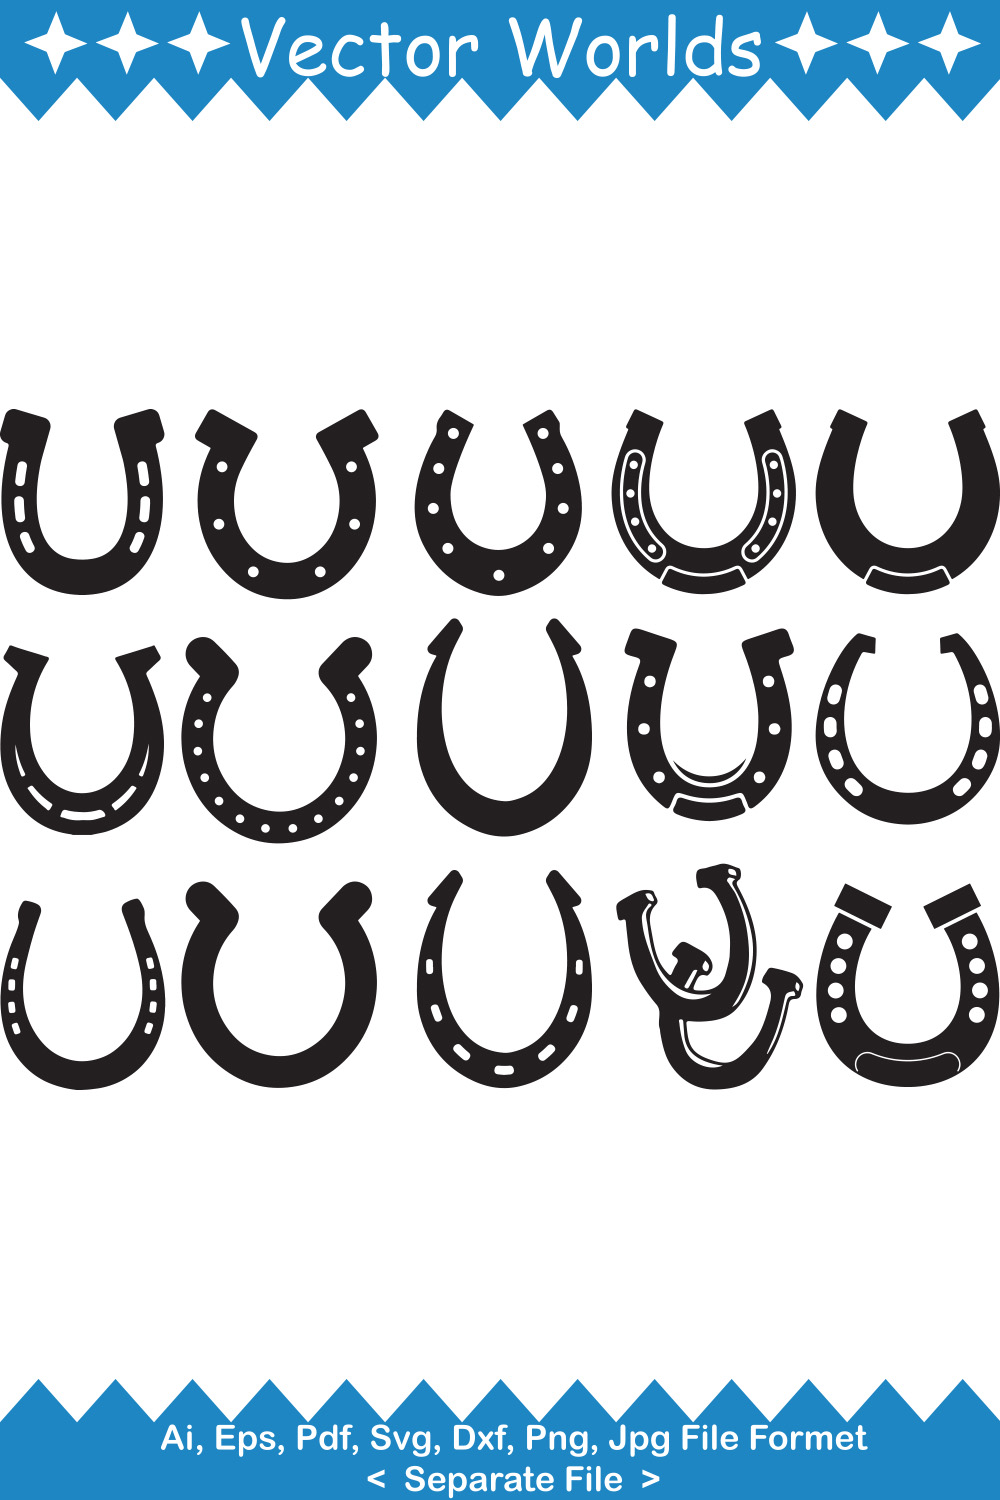 Set of black and white horseshoes with stars.